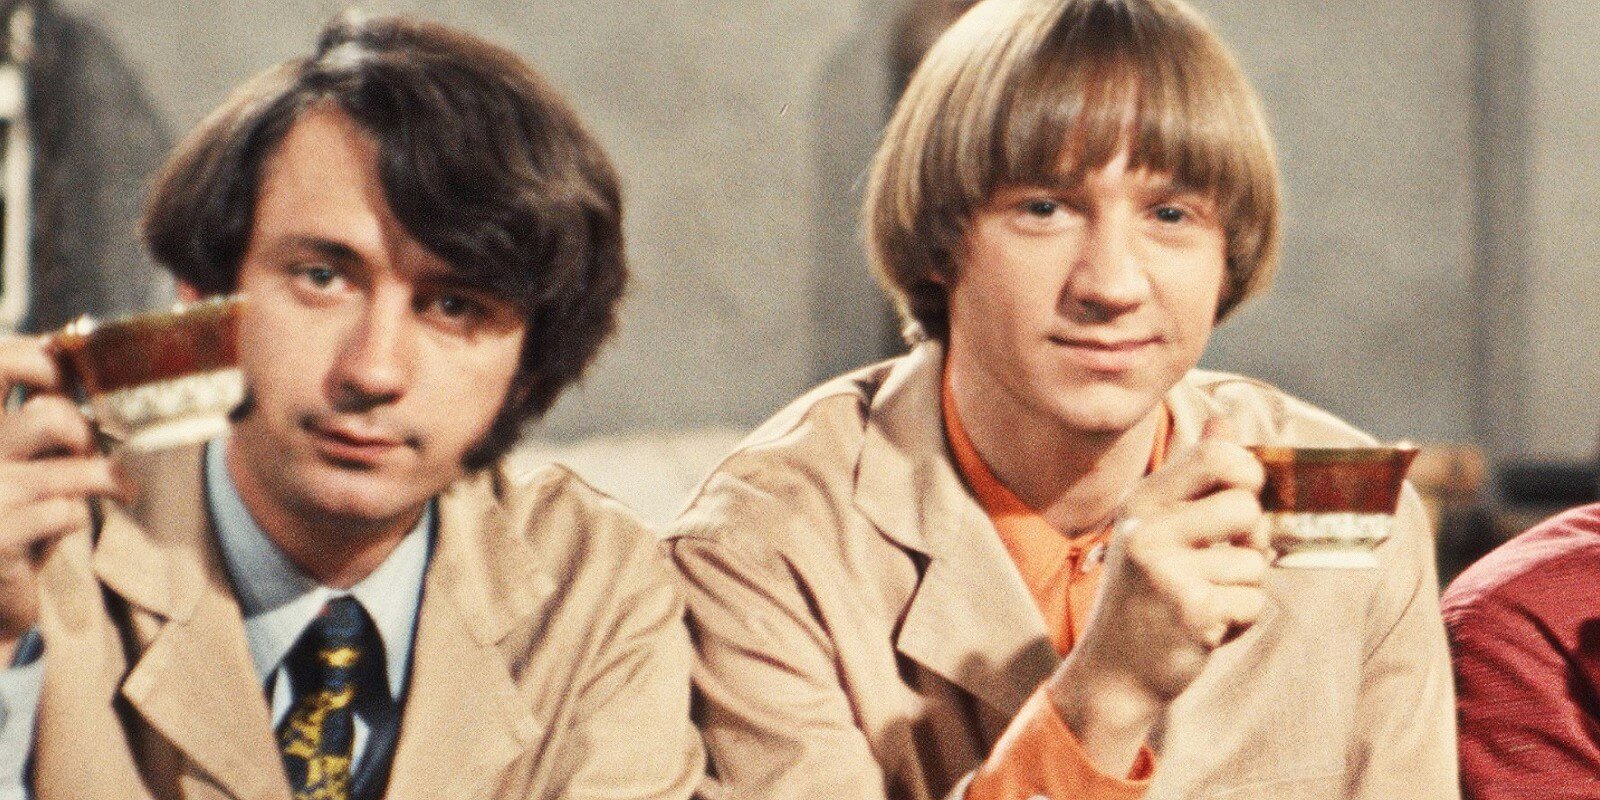 Mike Nesmith and Peter Tork on the set of 'The Monkees.'